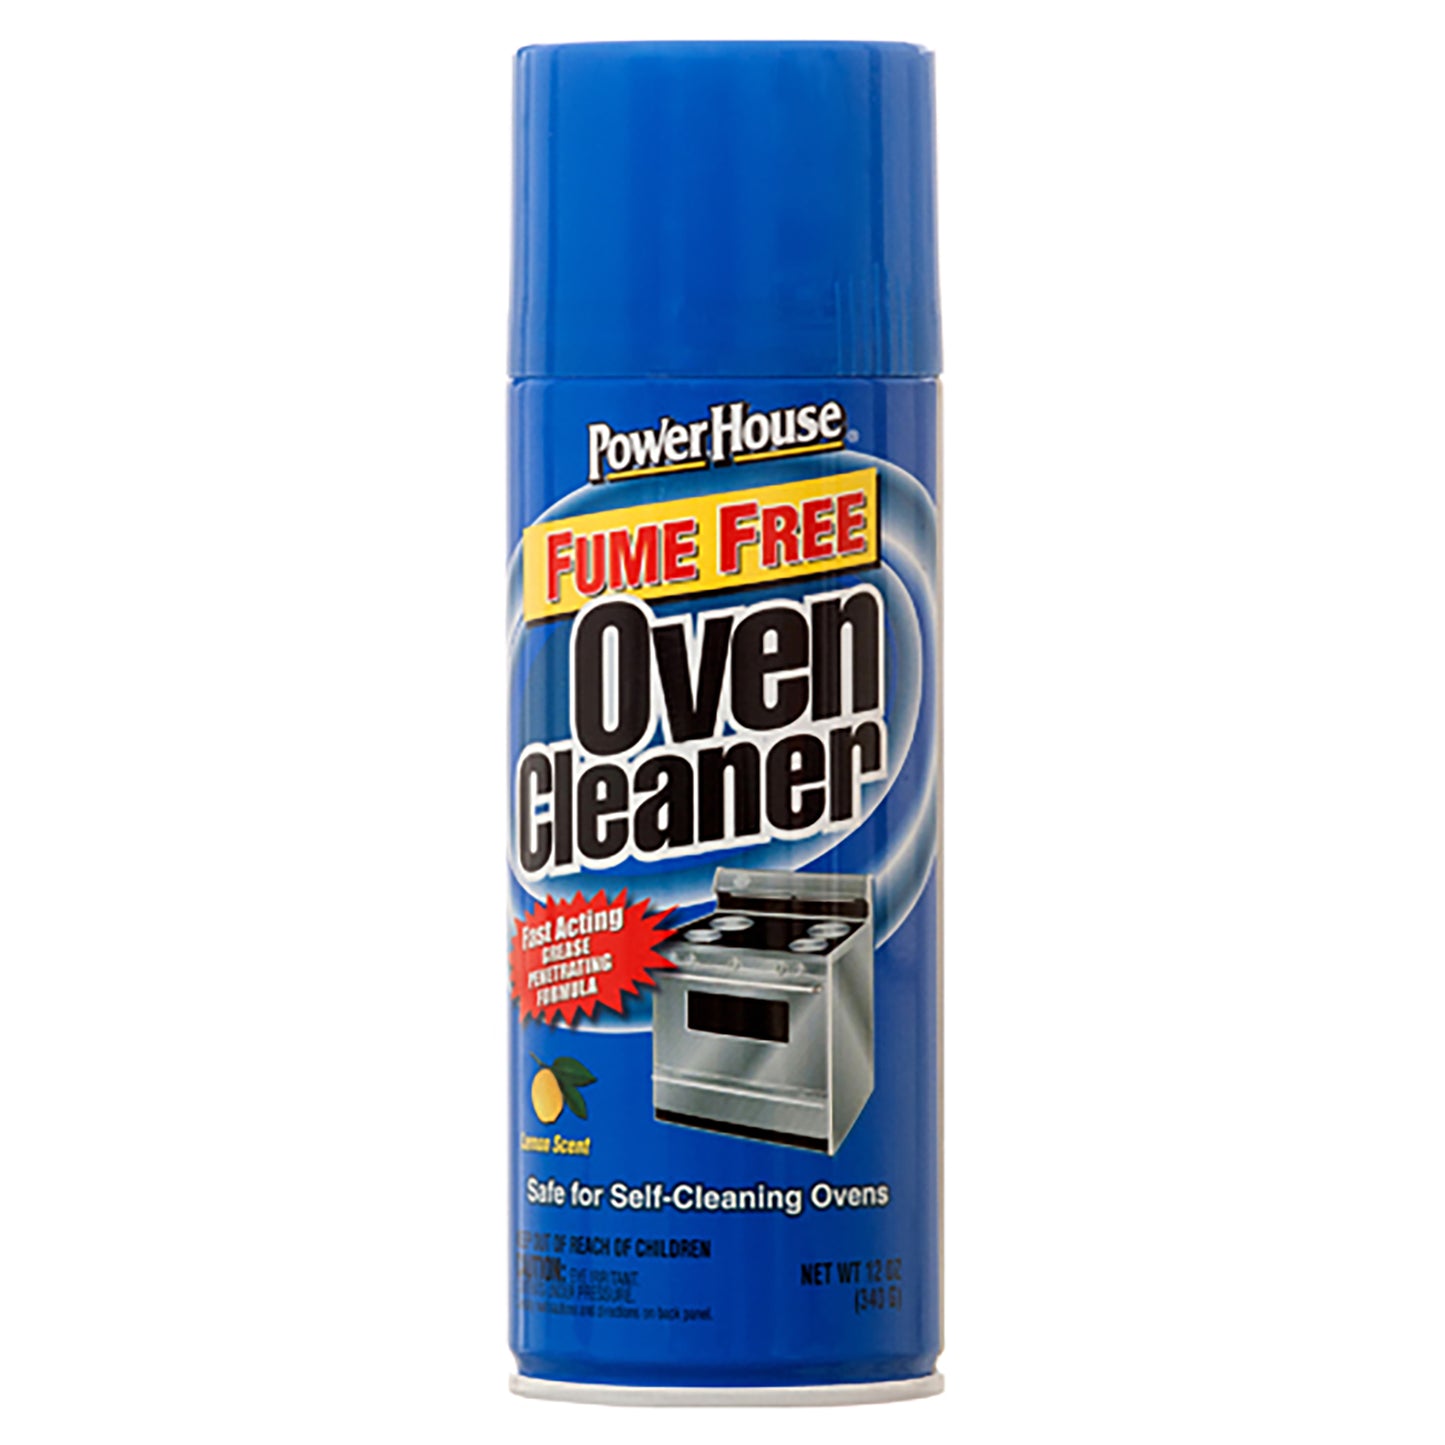 FUME FREE OVEN CLEANER